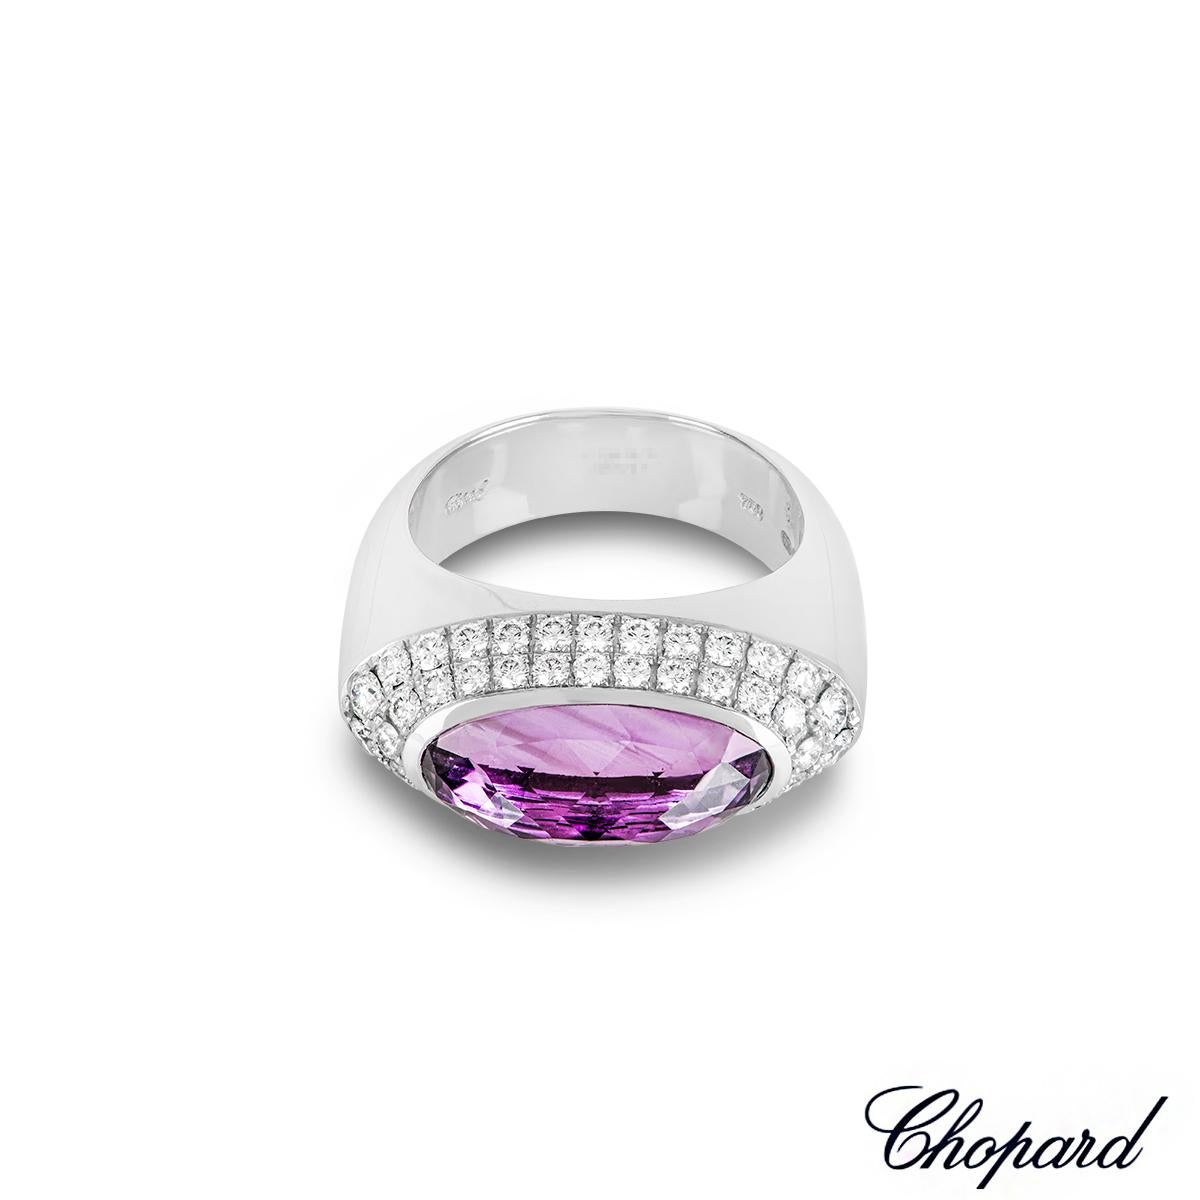 Round Cut Chopard White Gold Amethyst & Diamond Ring 82/3839-1110 For Sale